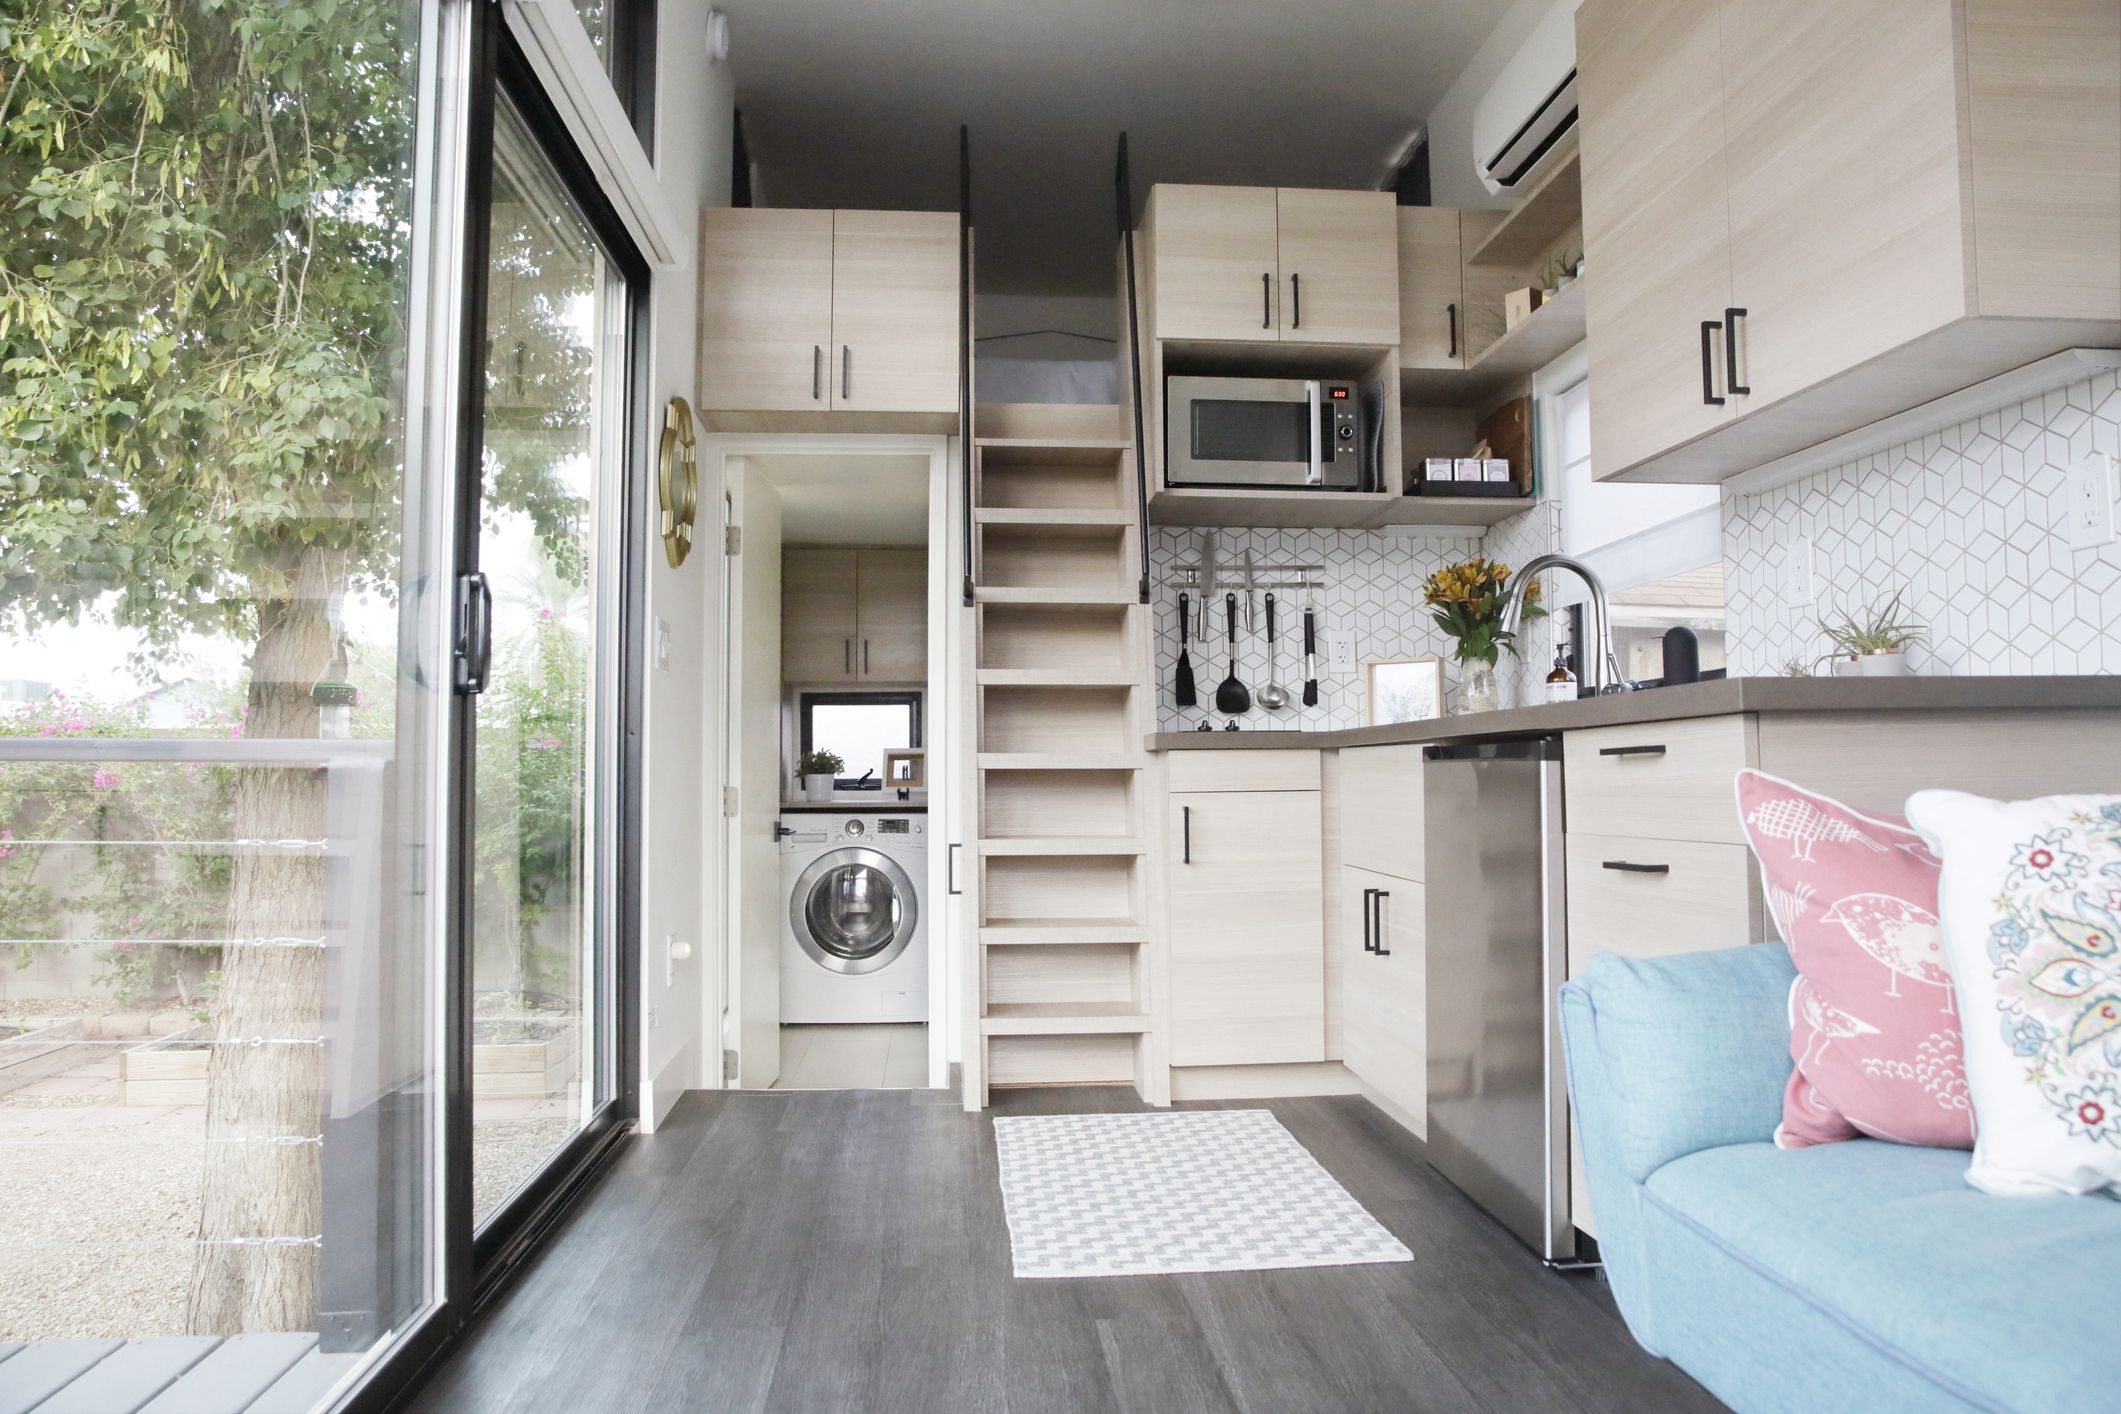 6 Reasons People Leave the Tiny House Lifestyle